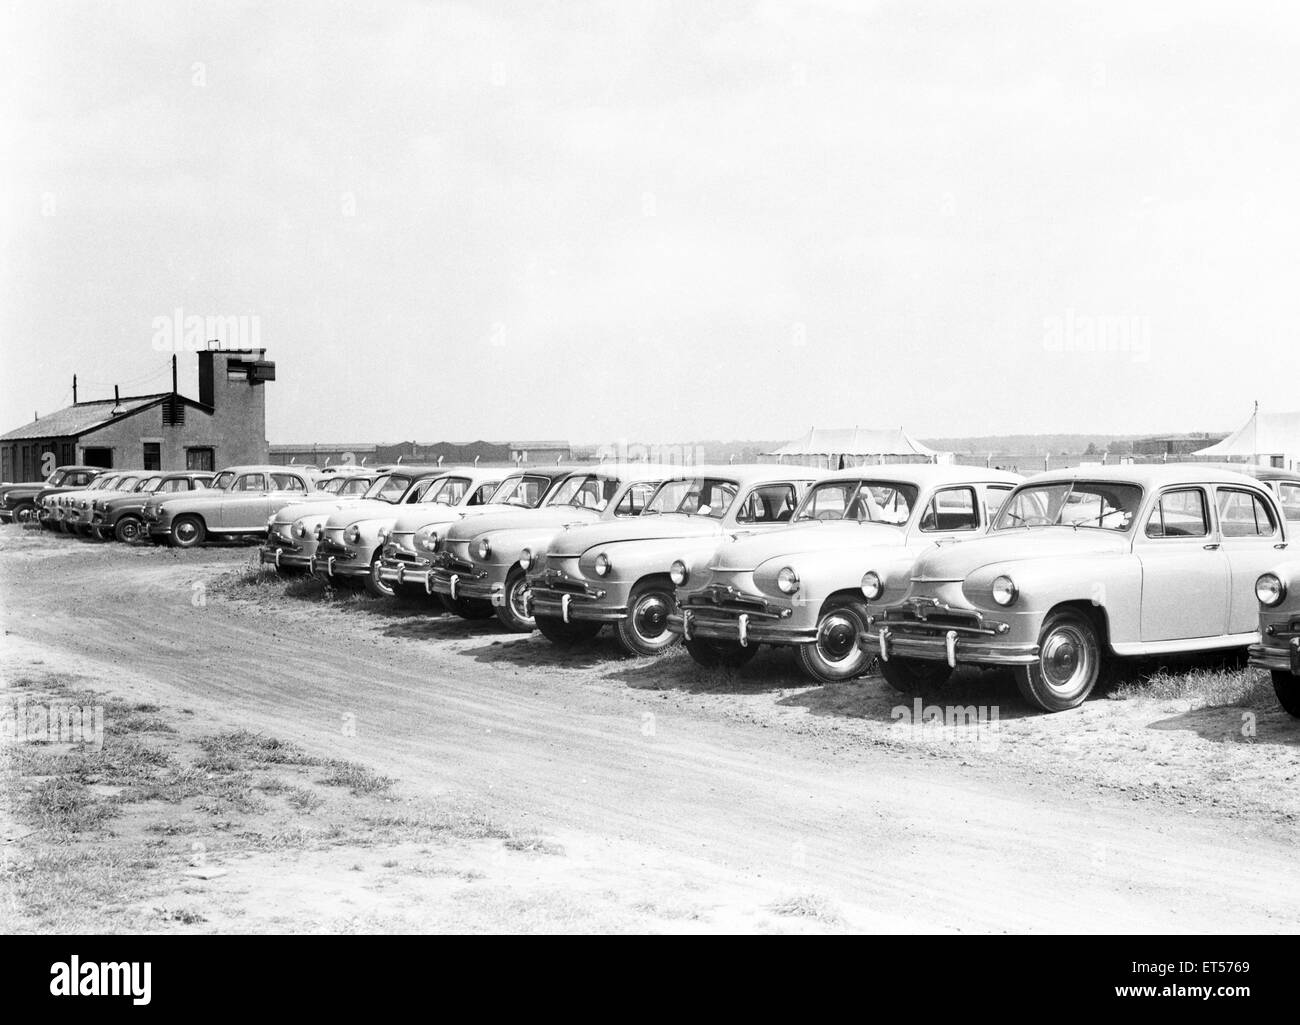 Standard Vanguard cars awaiting delivery seen here at Baginton Airport June 1954 Stock Photo